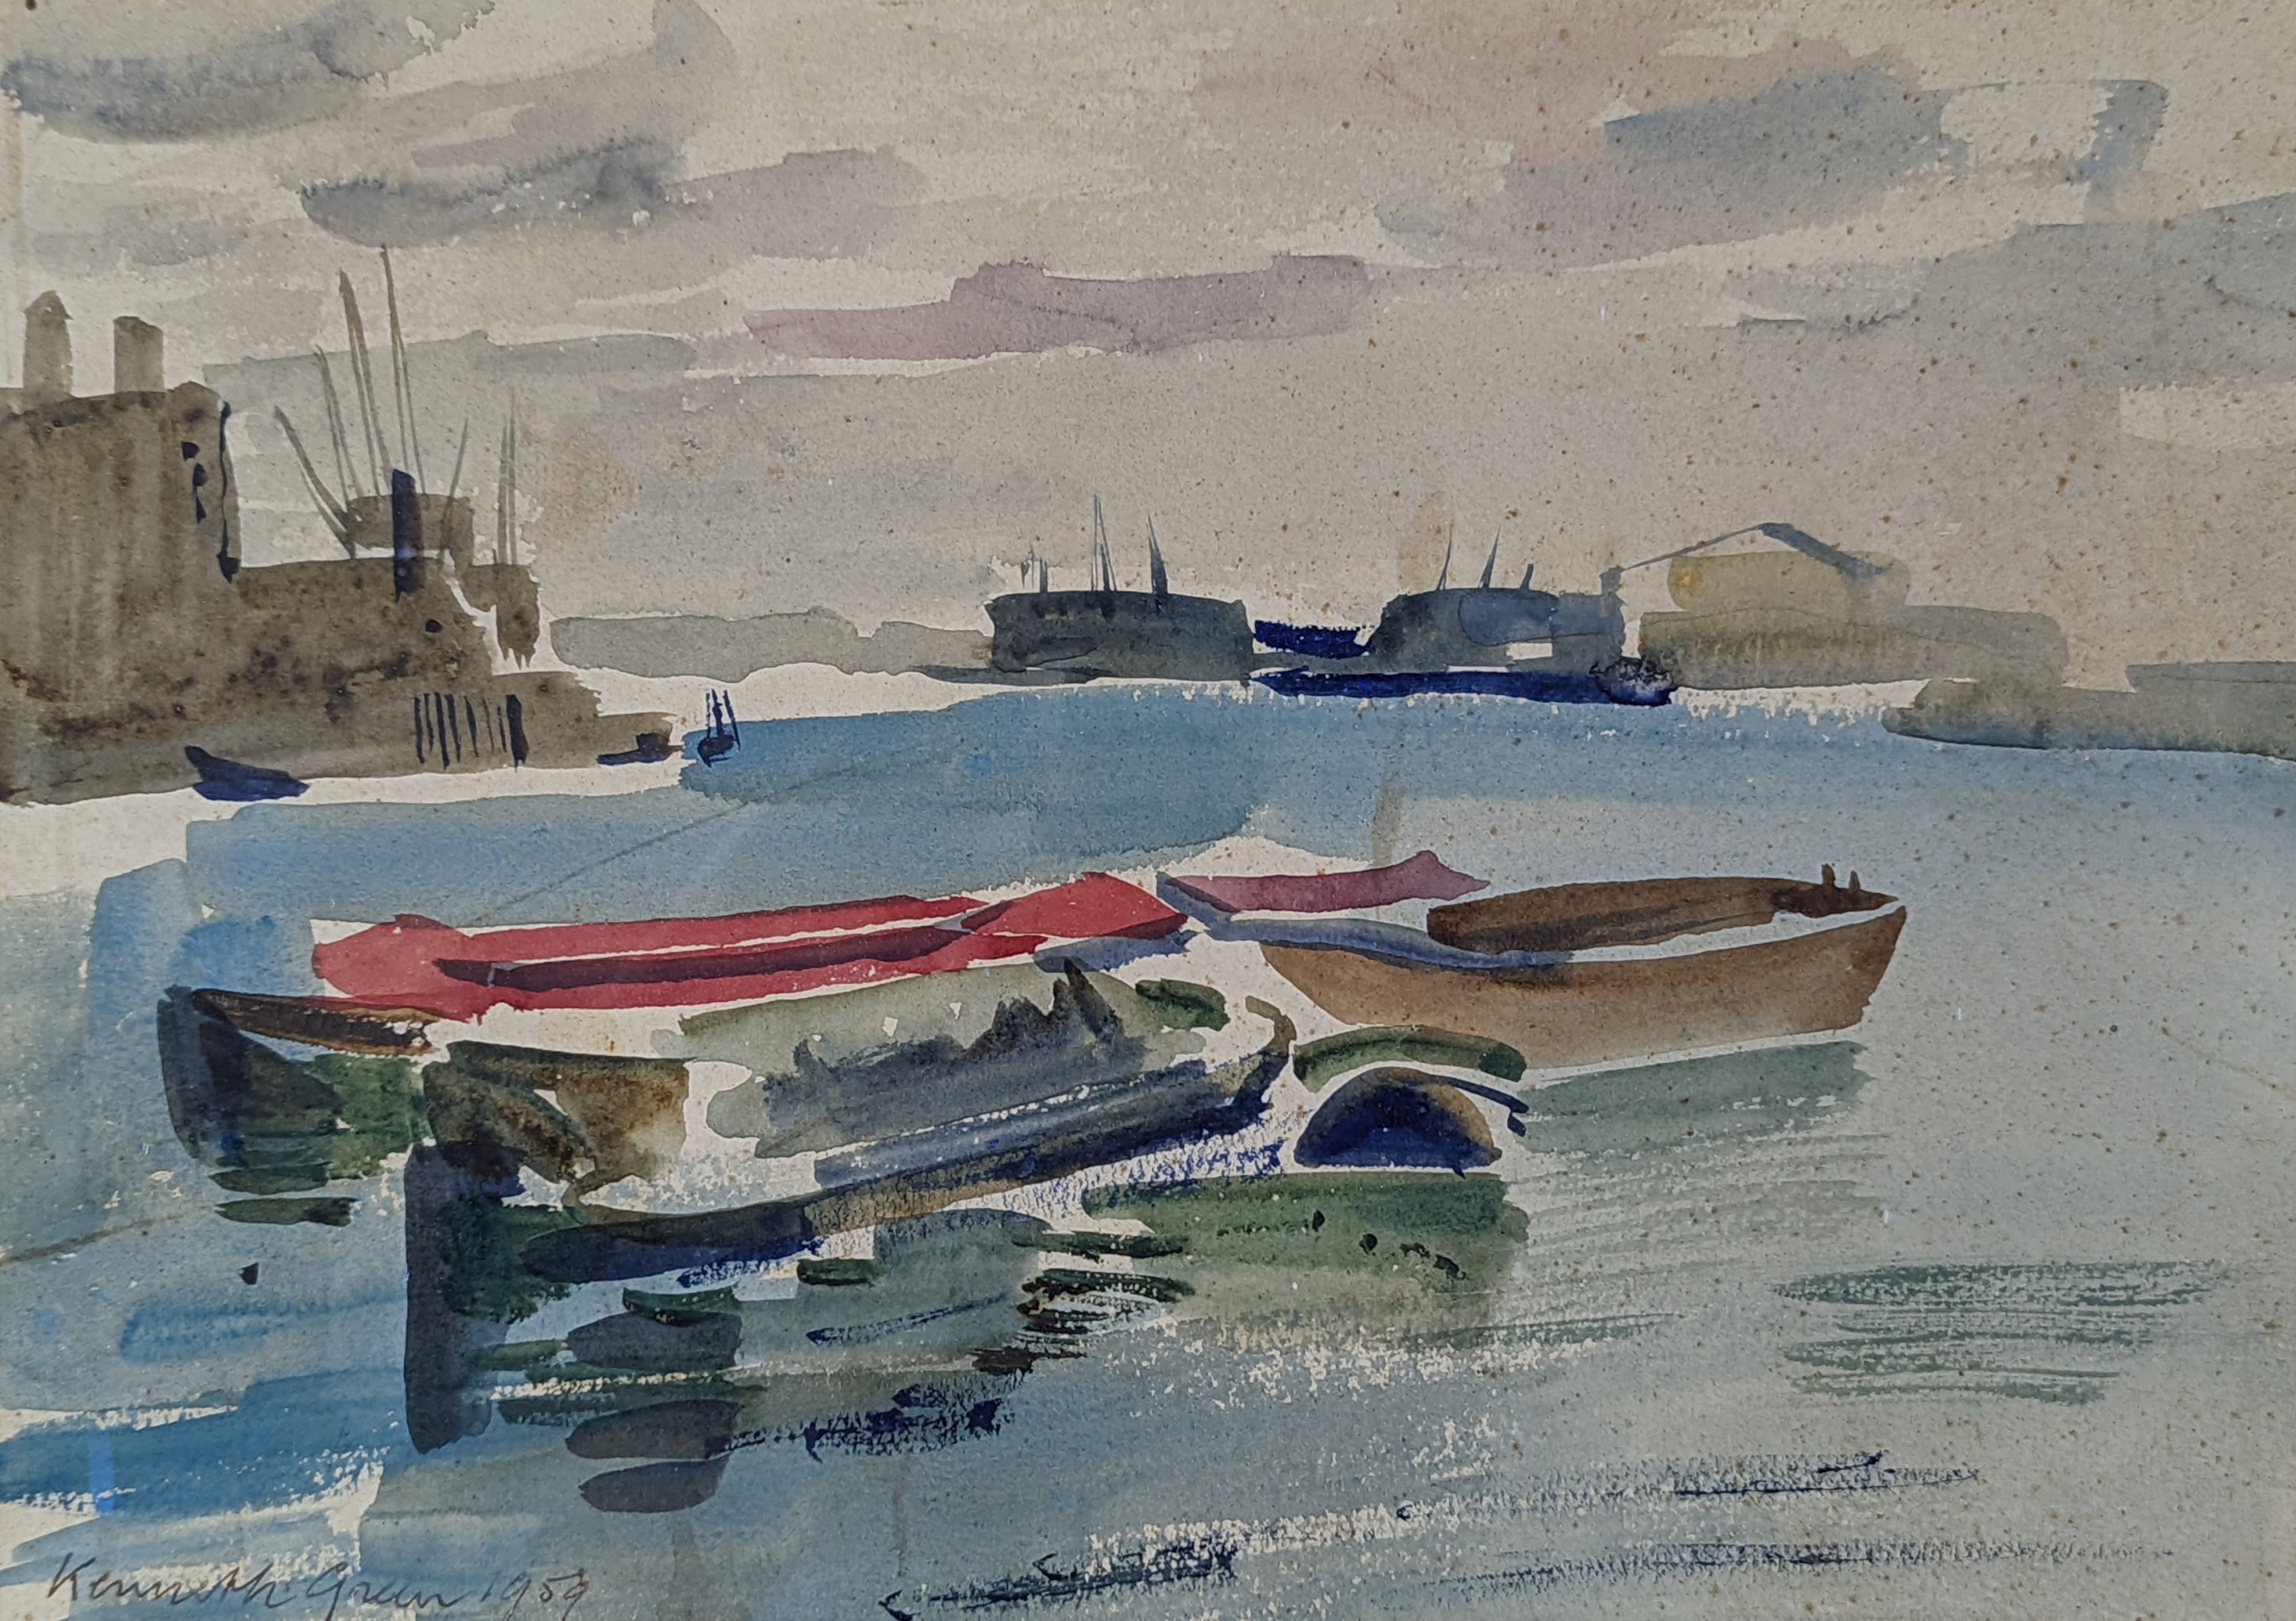 Kenneth Green (1916-1973), watercolour, View of along The Thames, signed and dated 1959, 24 x 34cm